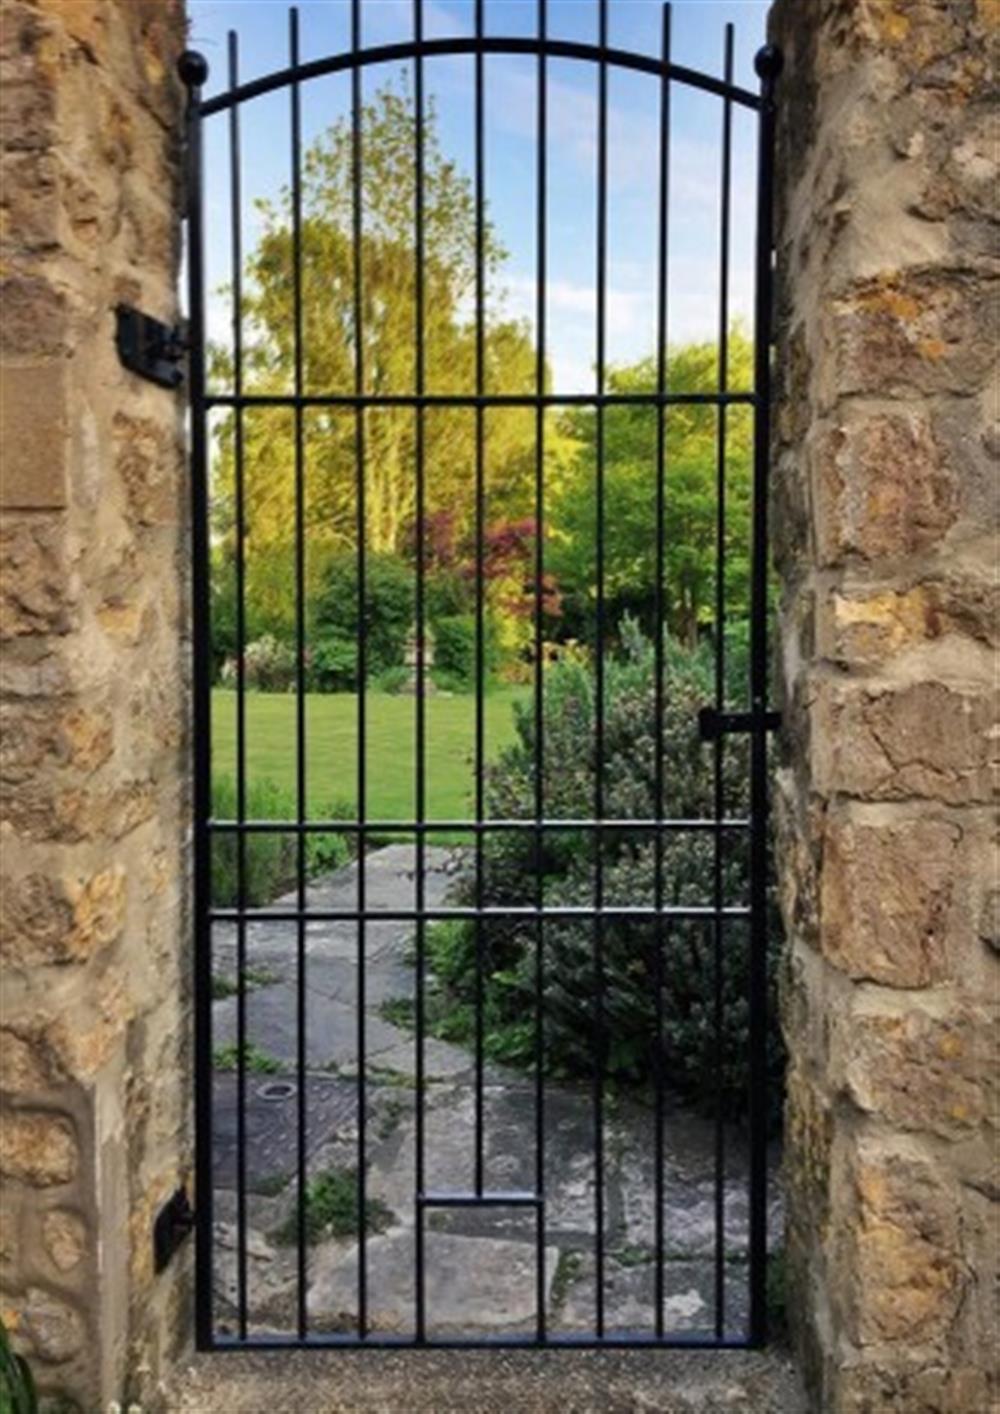 Tim's gate at The Old Bindery, Whatley House in Beaminster